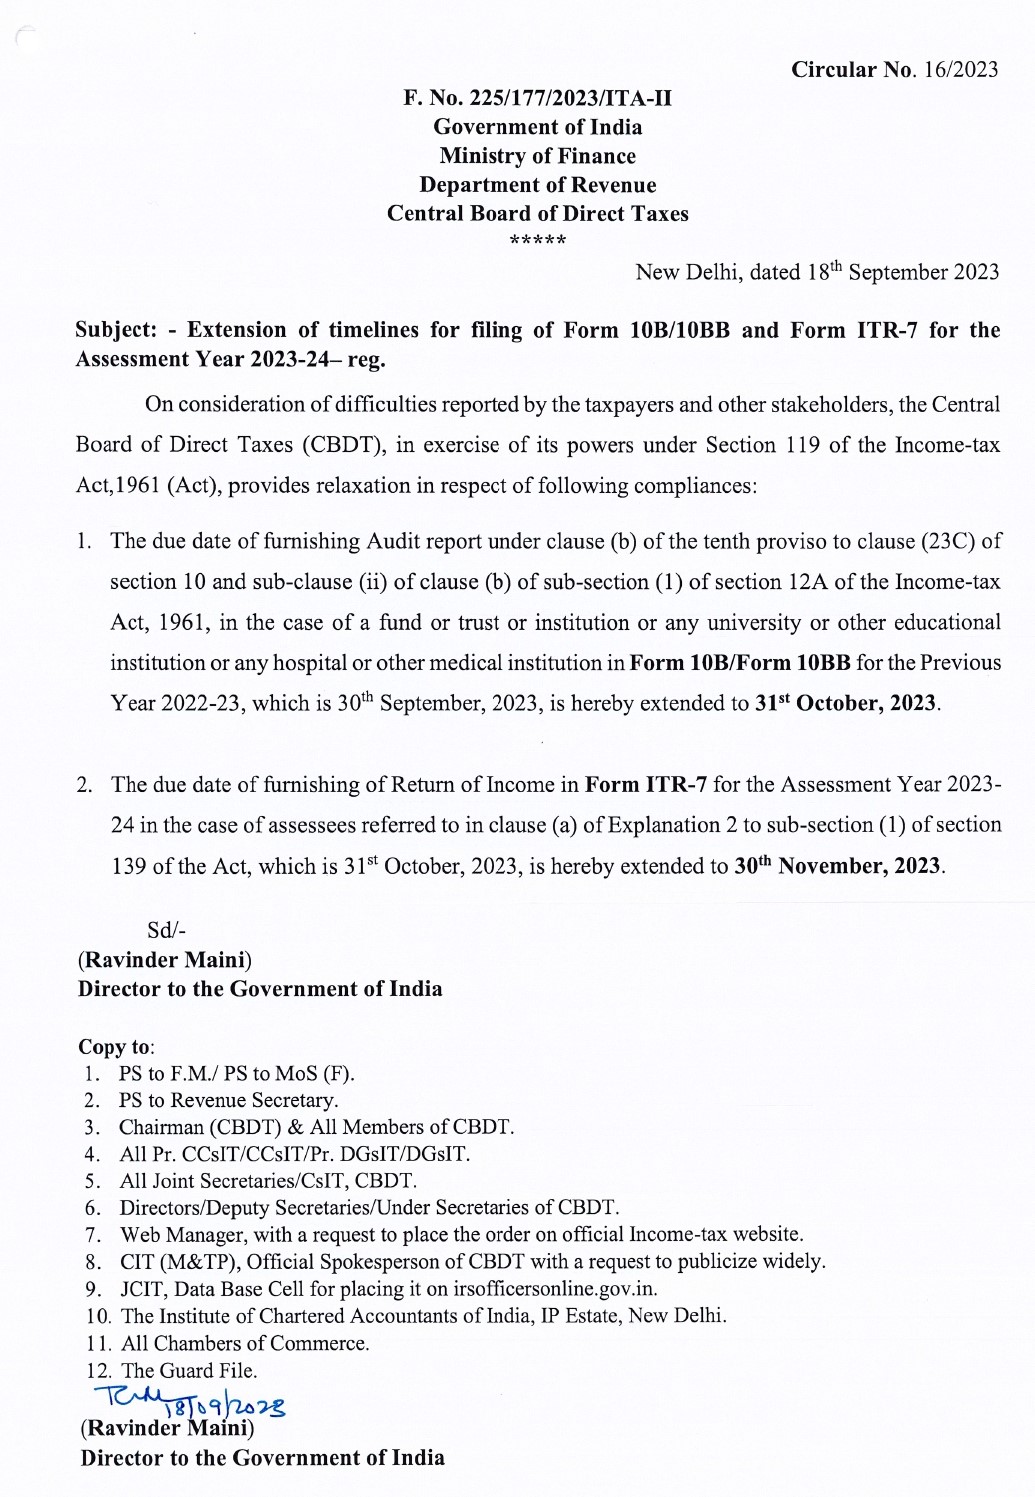 CBDT extends due date for filing of Form 10B/10BB and Form ITR-7 for the Assessment Year 2023-24